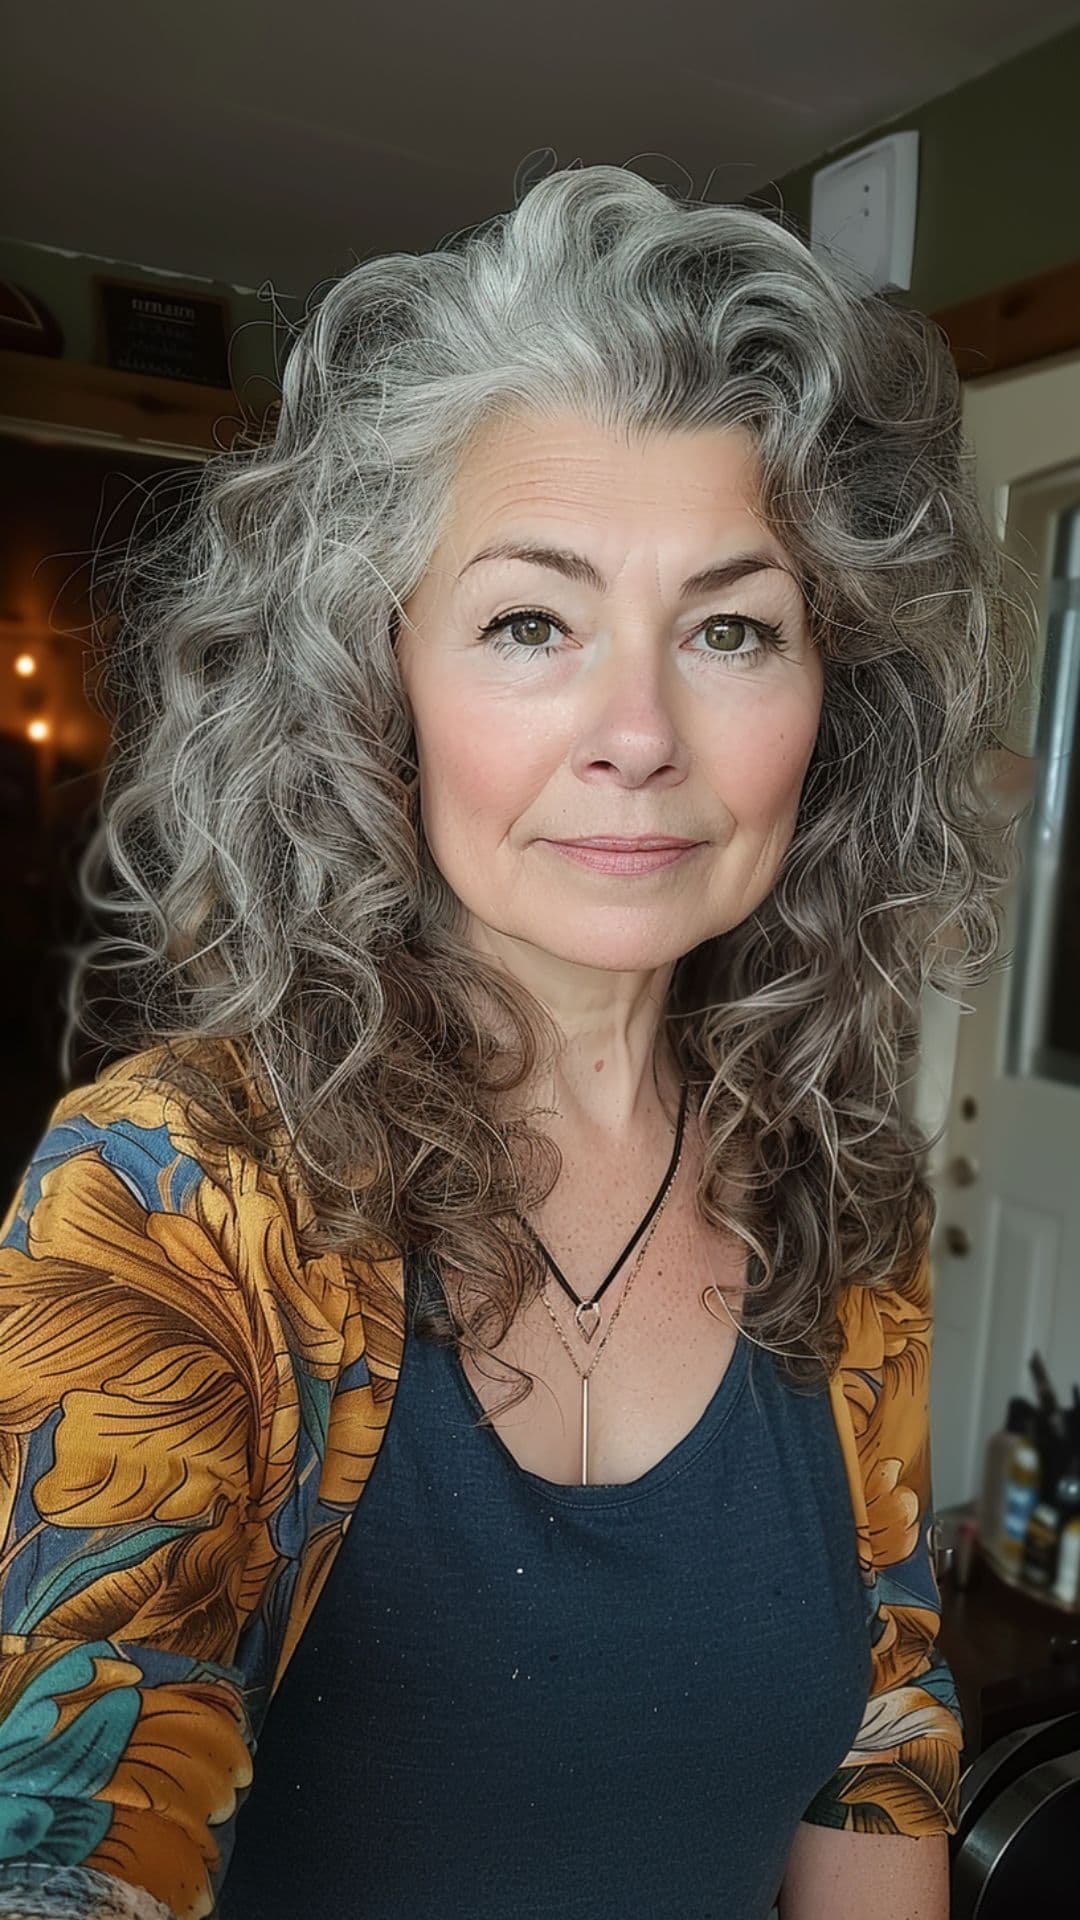 An old woman modelling her natural curls.